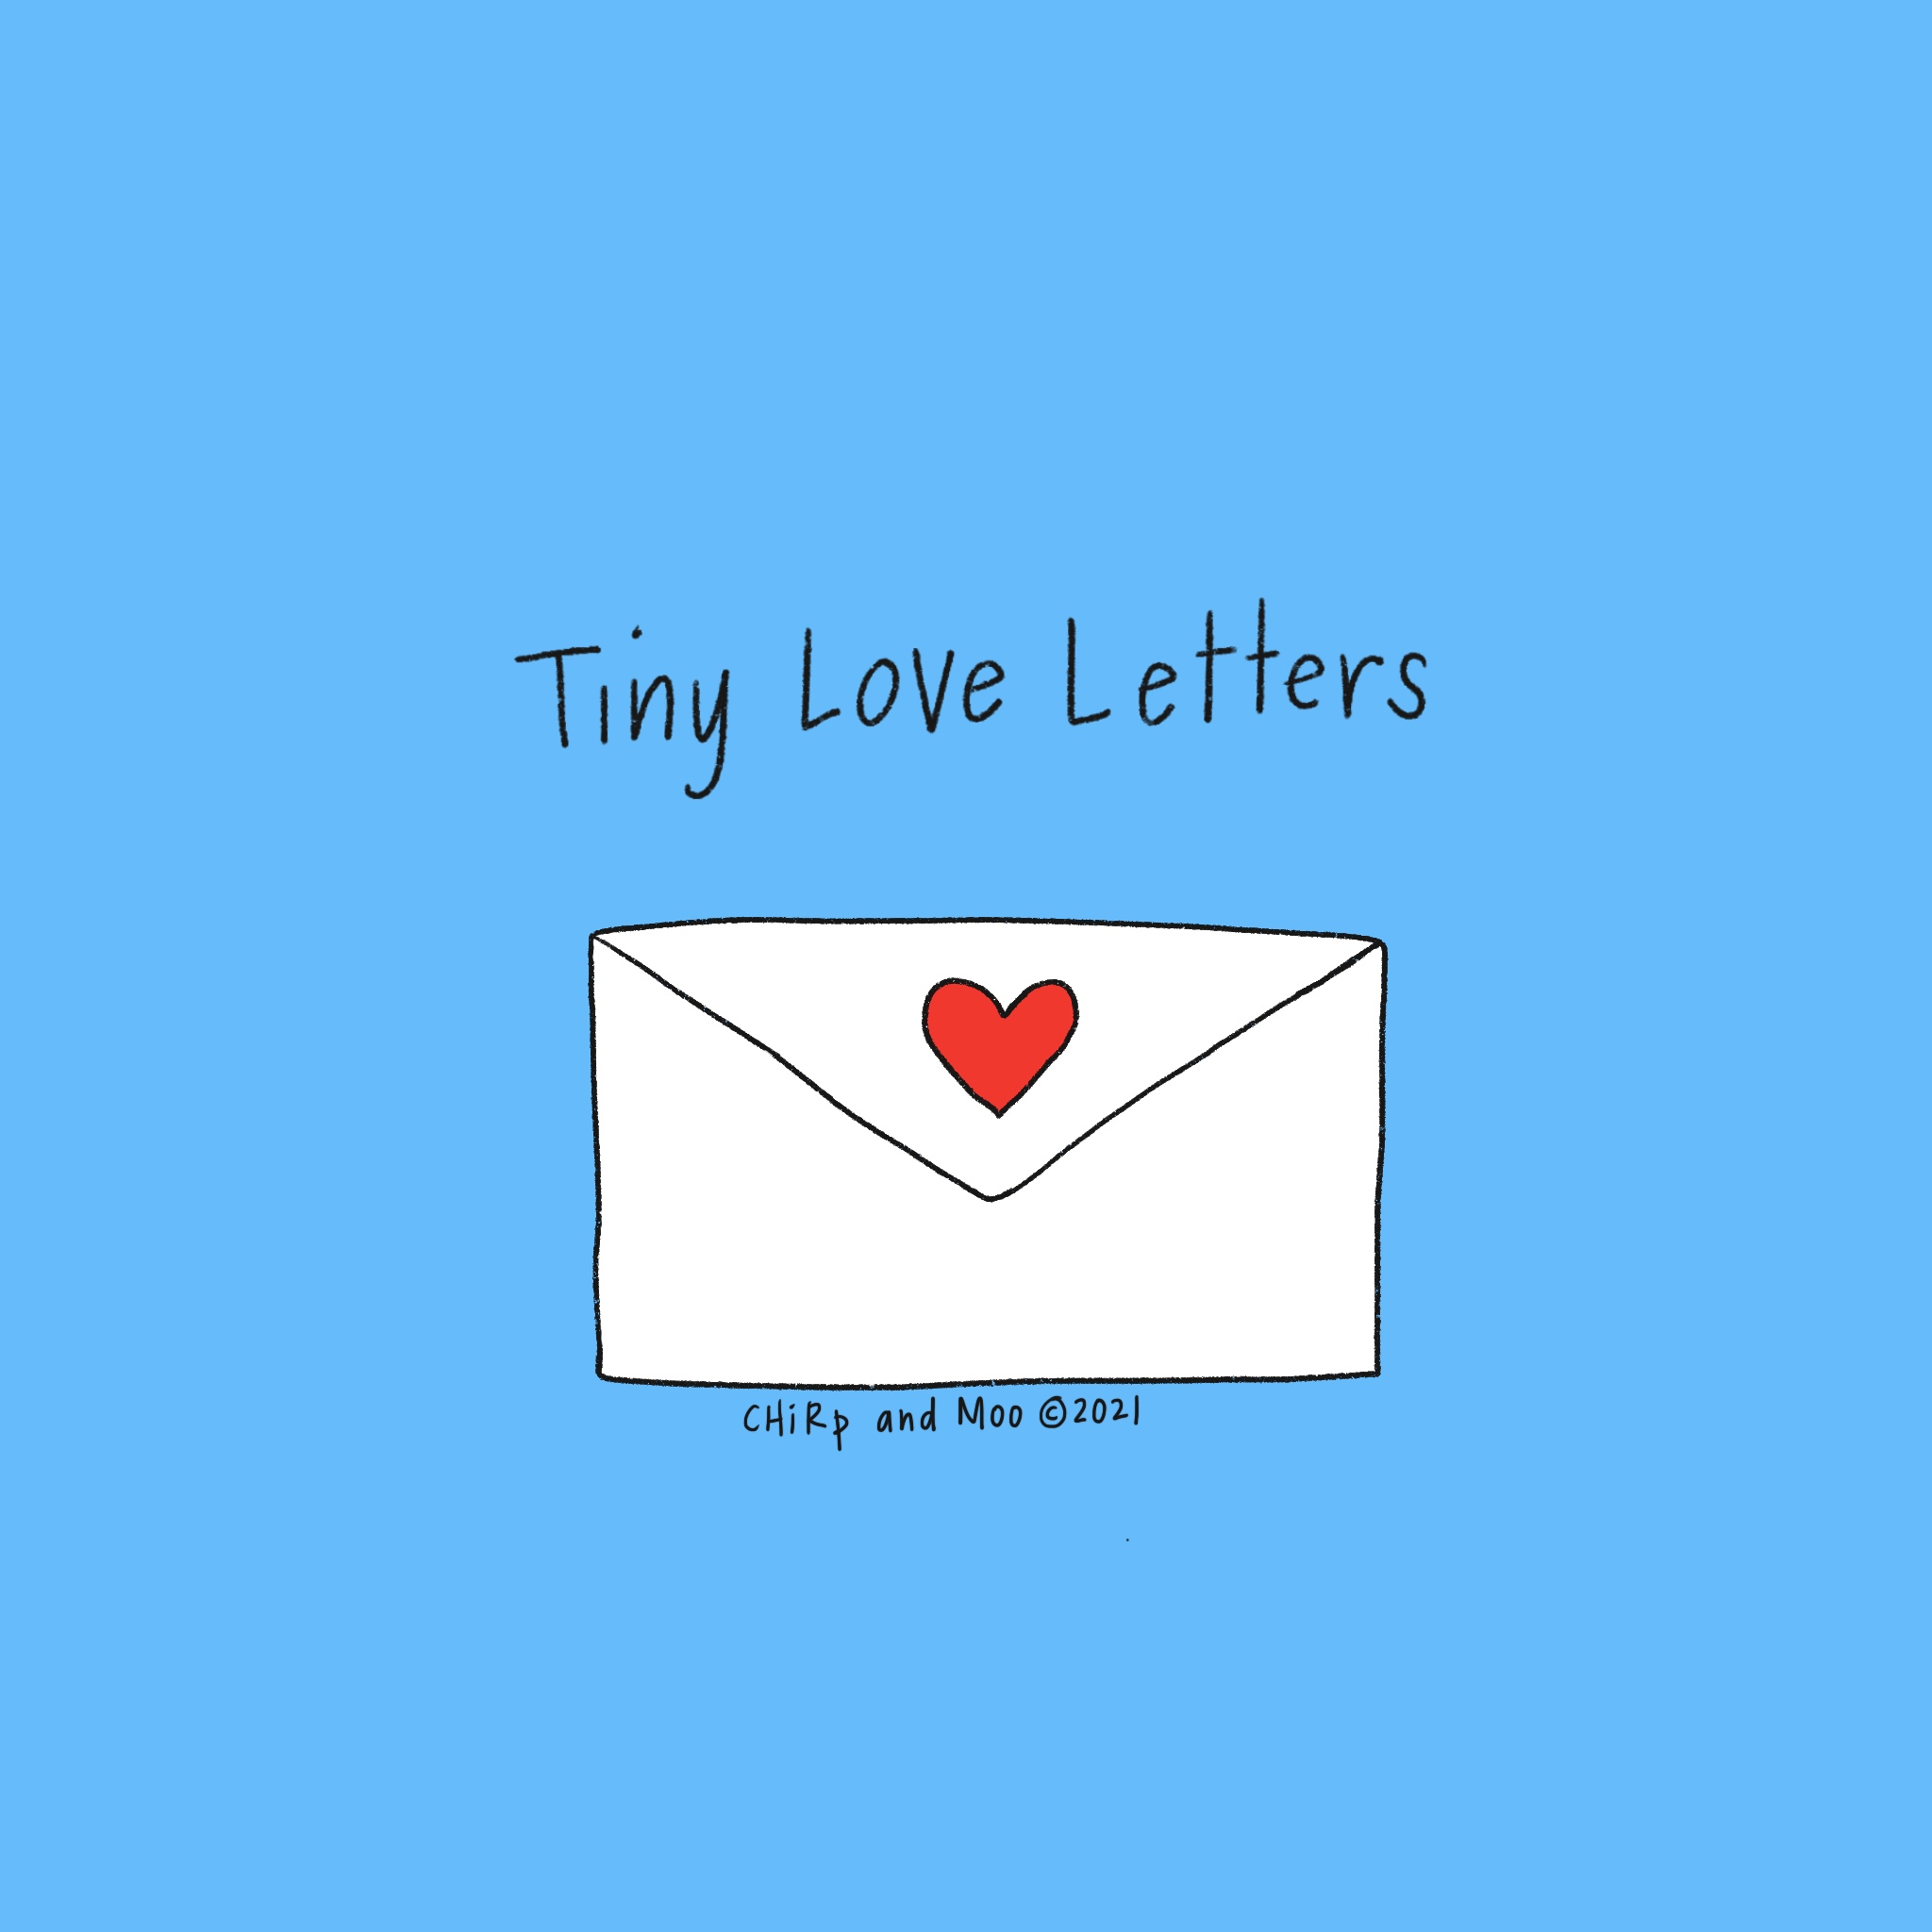 1. Tiny_Love_letters